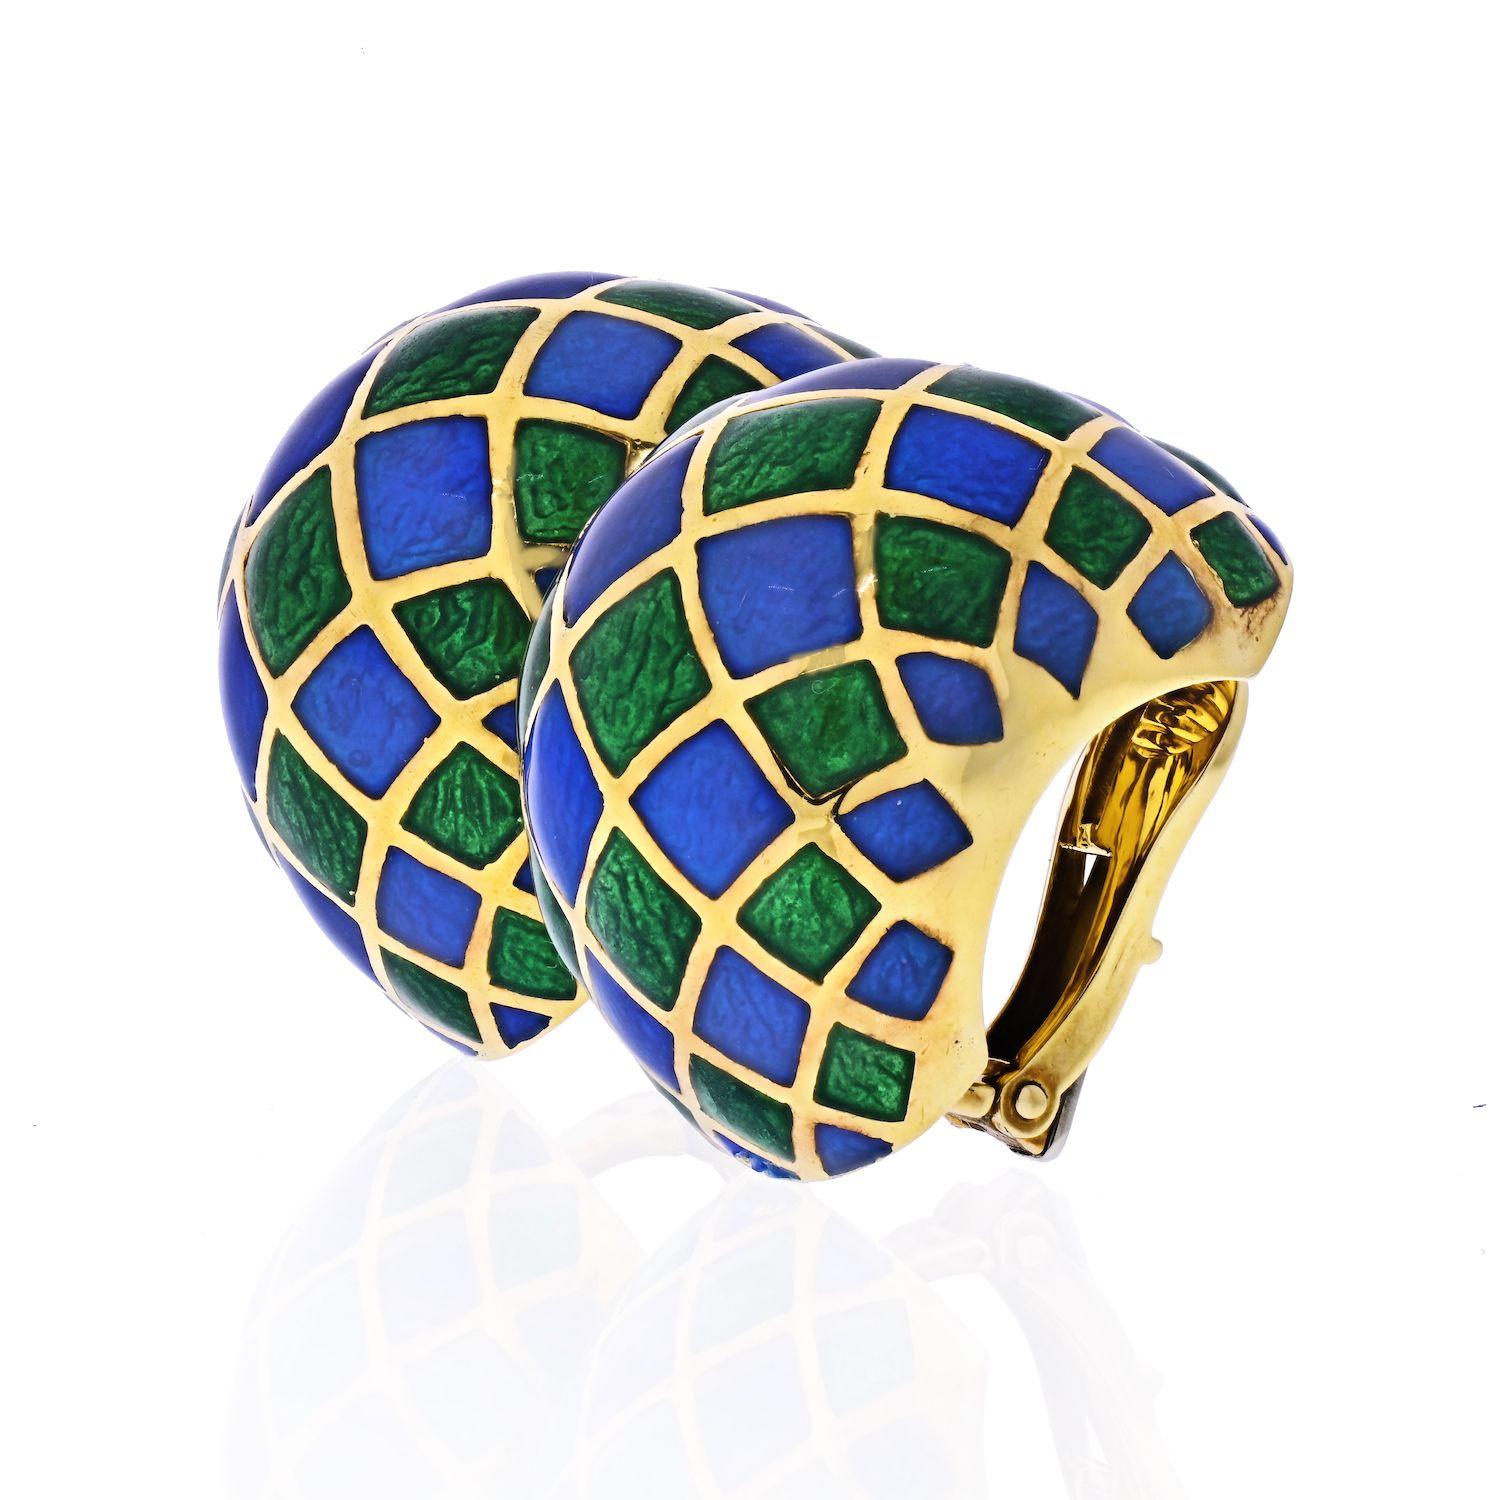 The dome earrings designed as a checkerboard pattern of blue and green enamel, intersected by polished gold bands, signed David Webb, clip-on closure posts can be added.
Length: 25mm .
